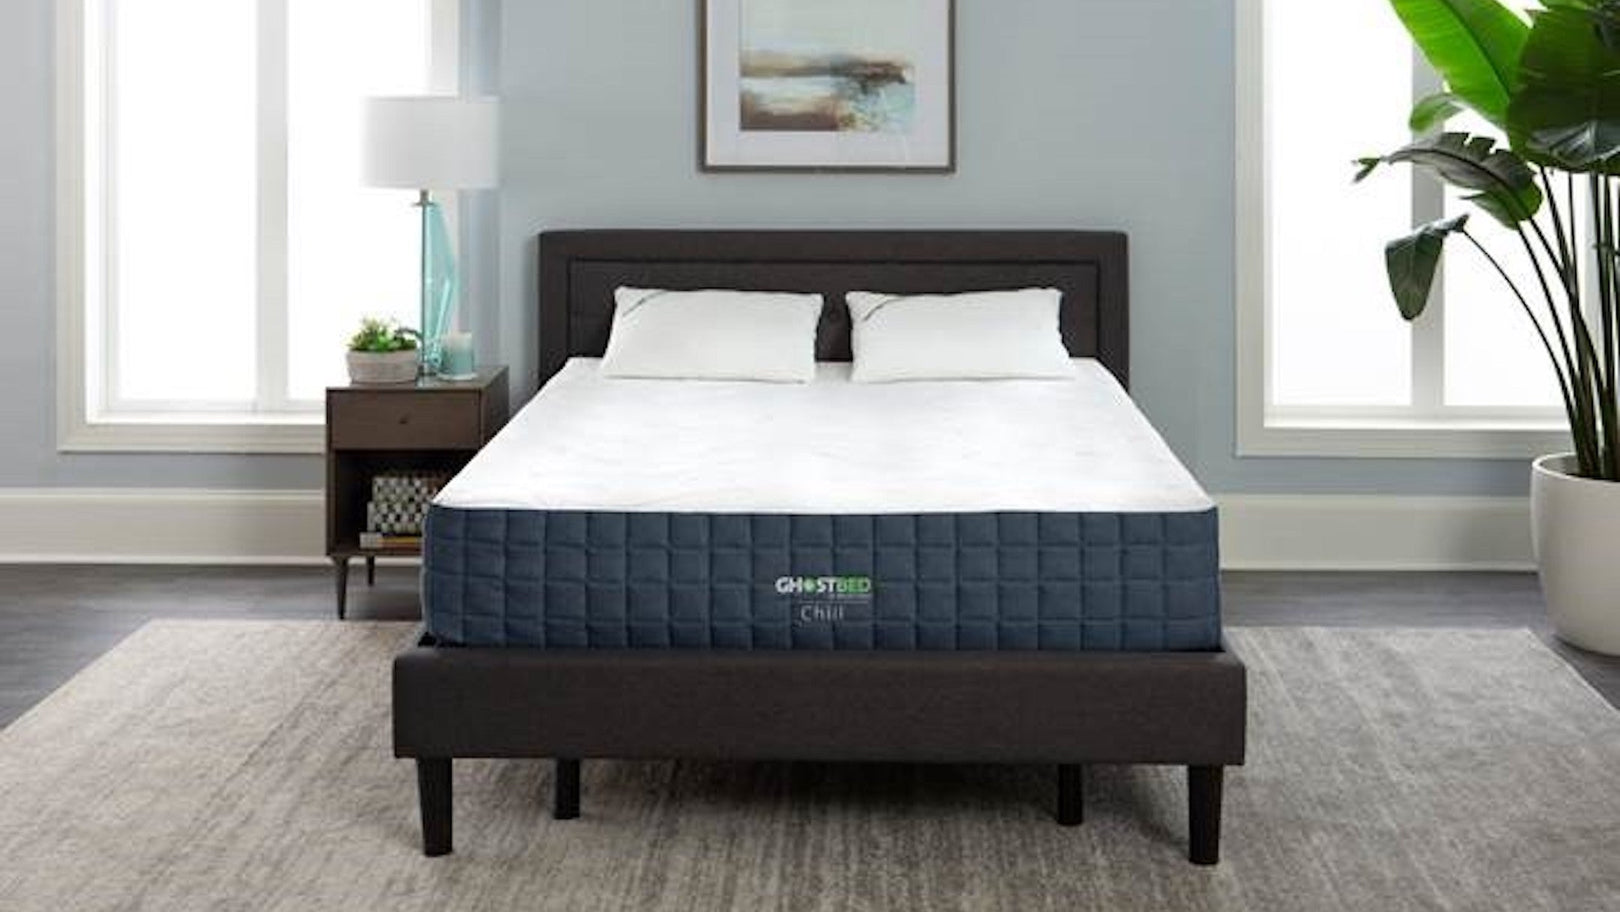 GhostBed Chill Mattress